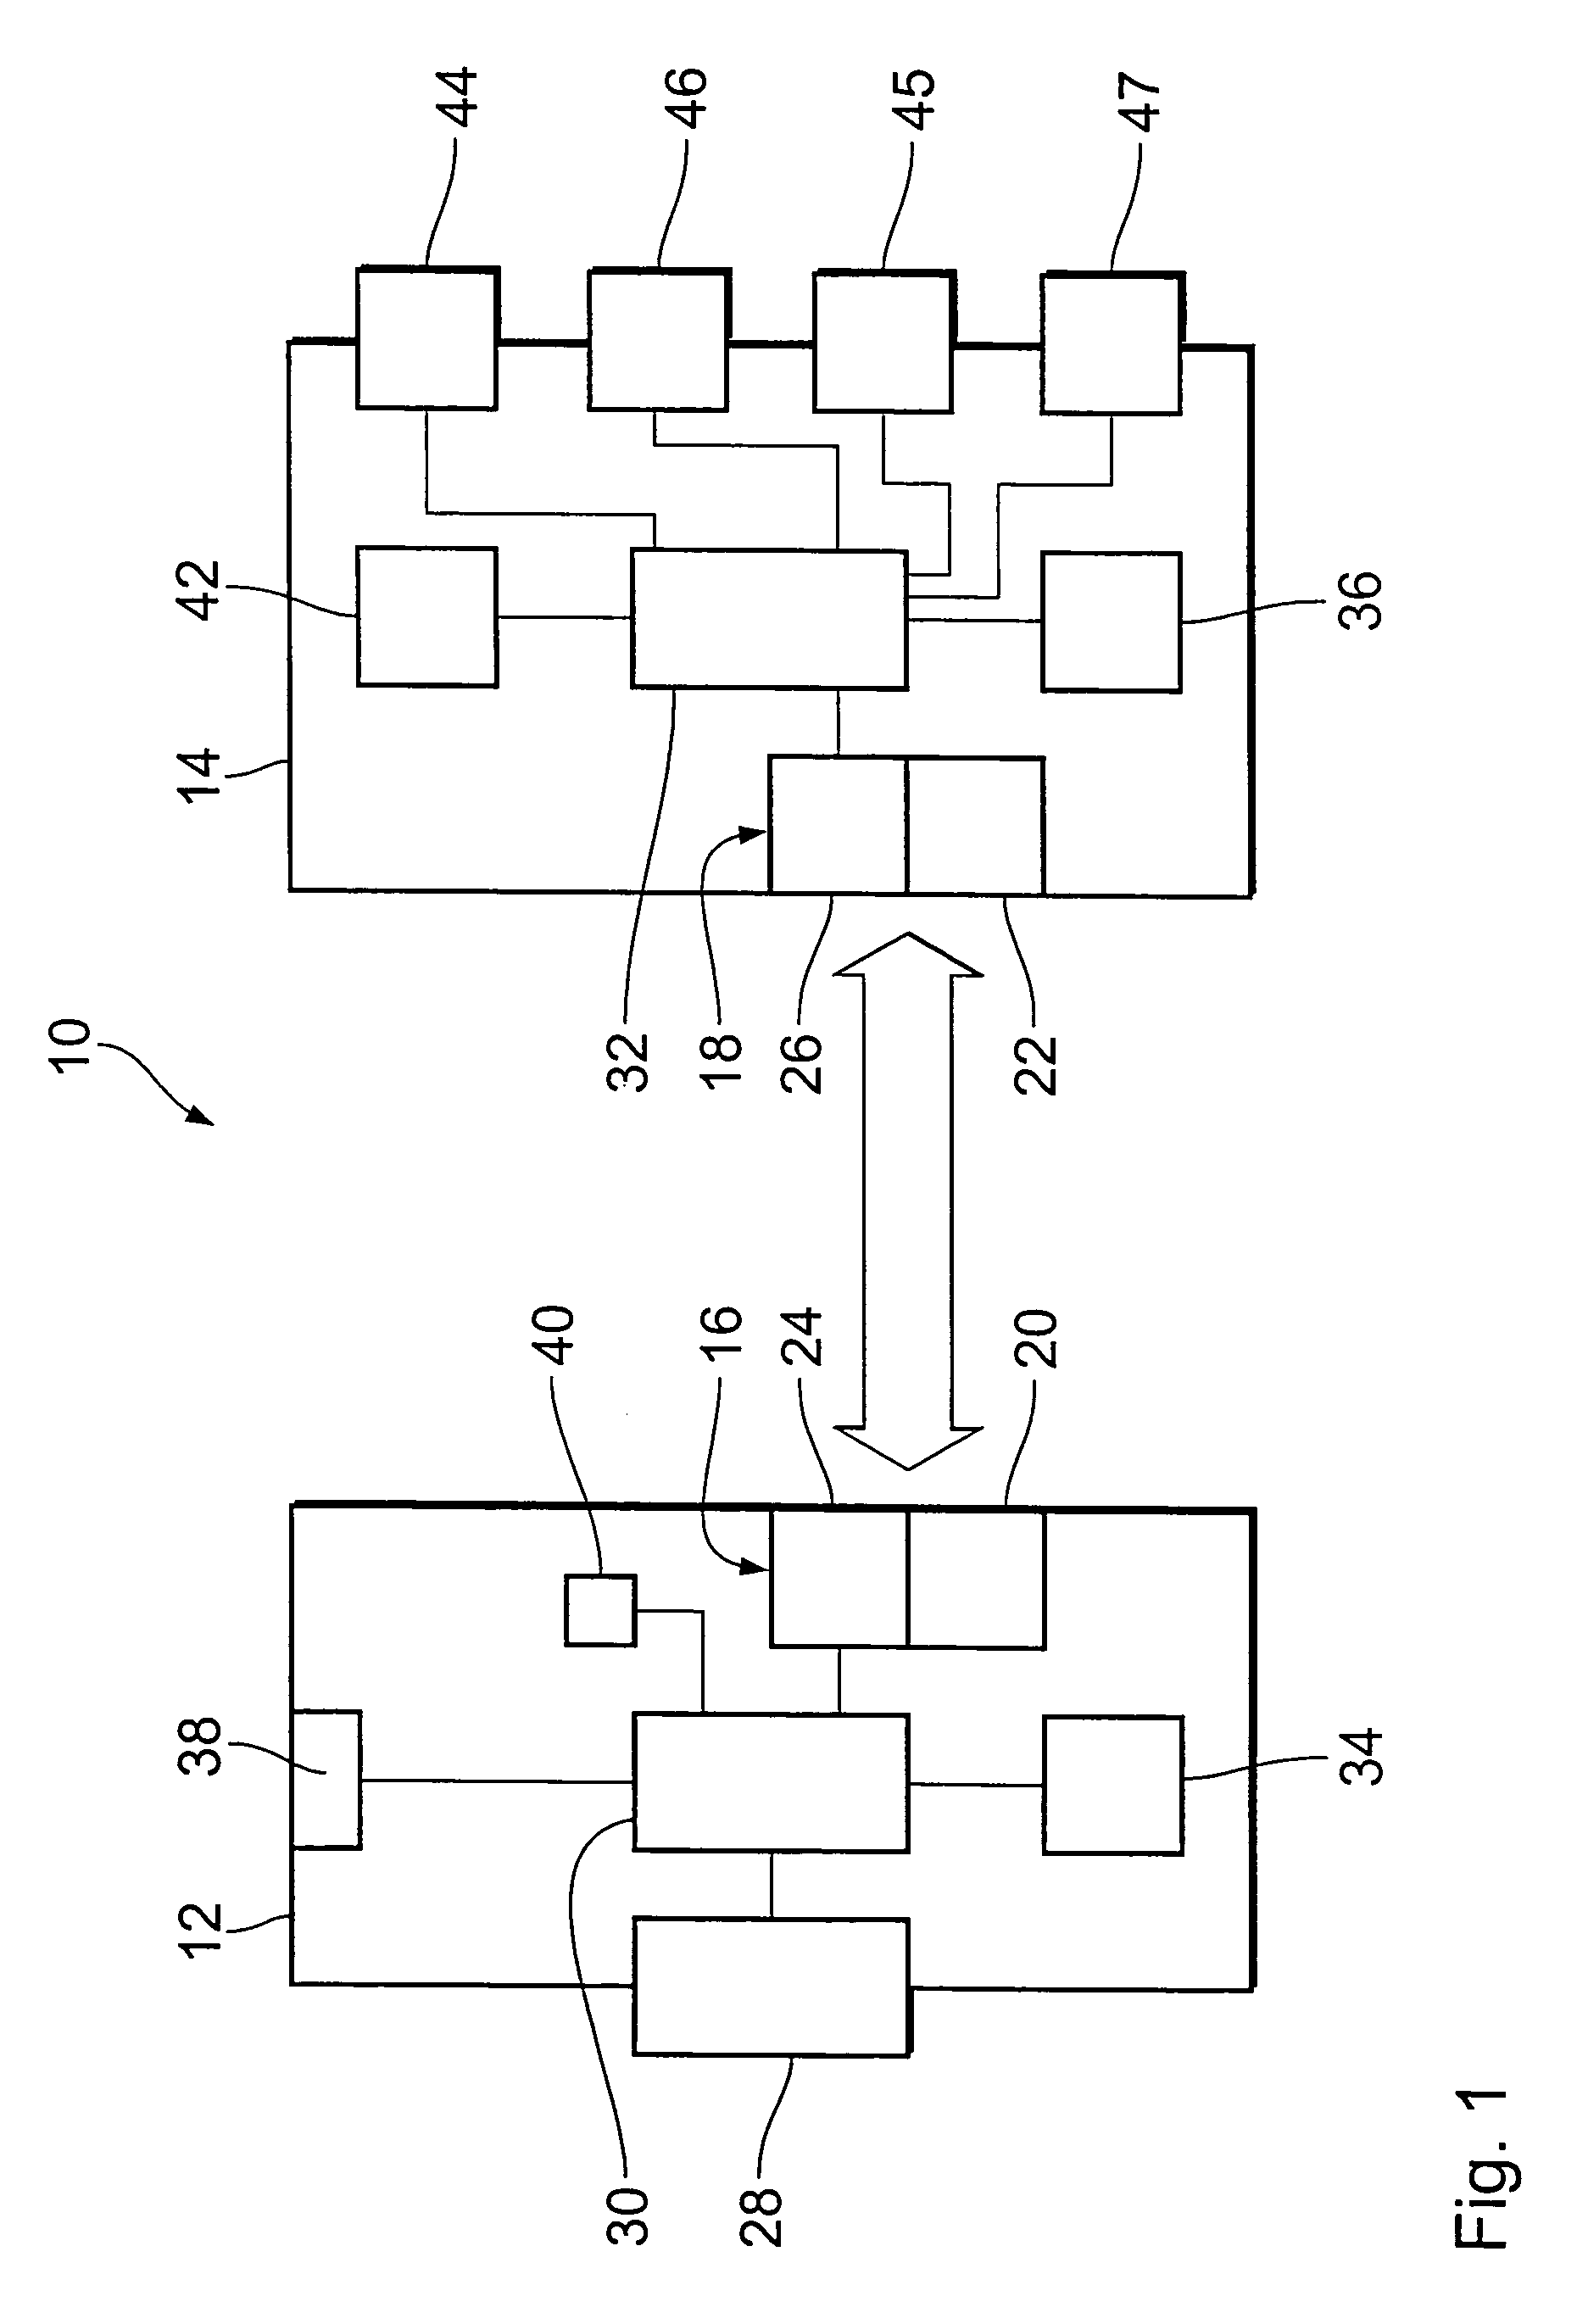 Arrangement for and method of monitoring, calibrating and optimizing a control of an electromedical implant